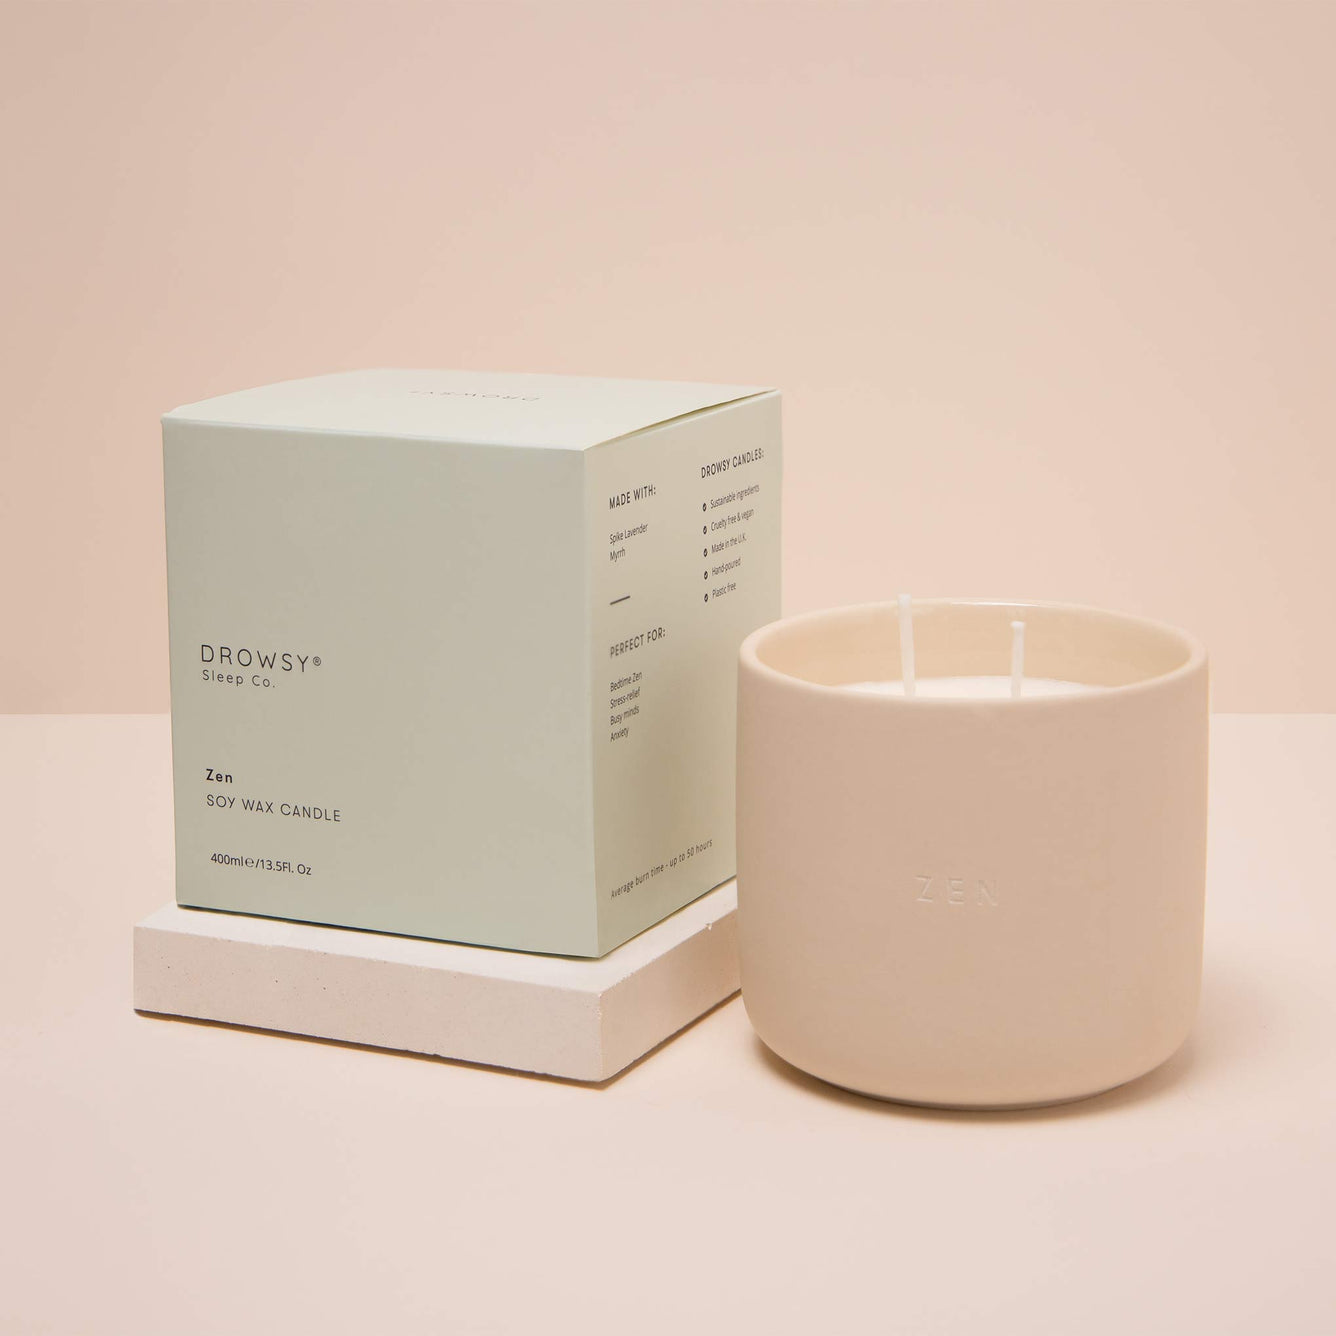 Pale green Drowsy Sleep Co. candle box with ceramic candle jar on cream coloured background